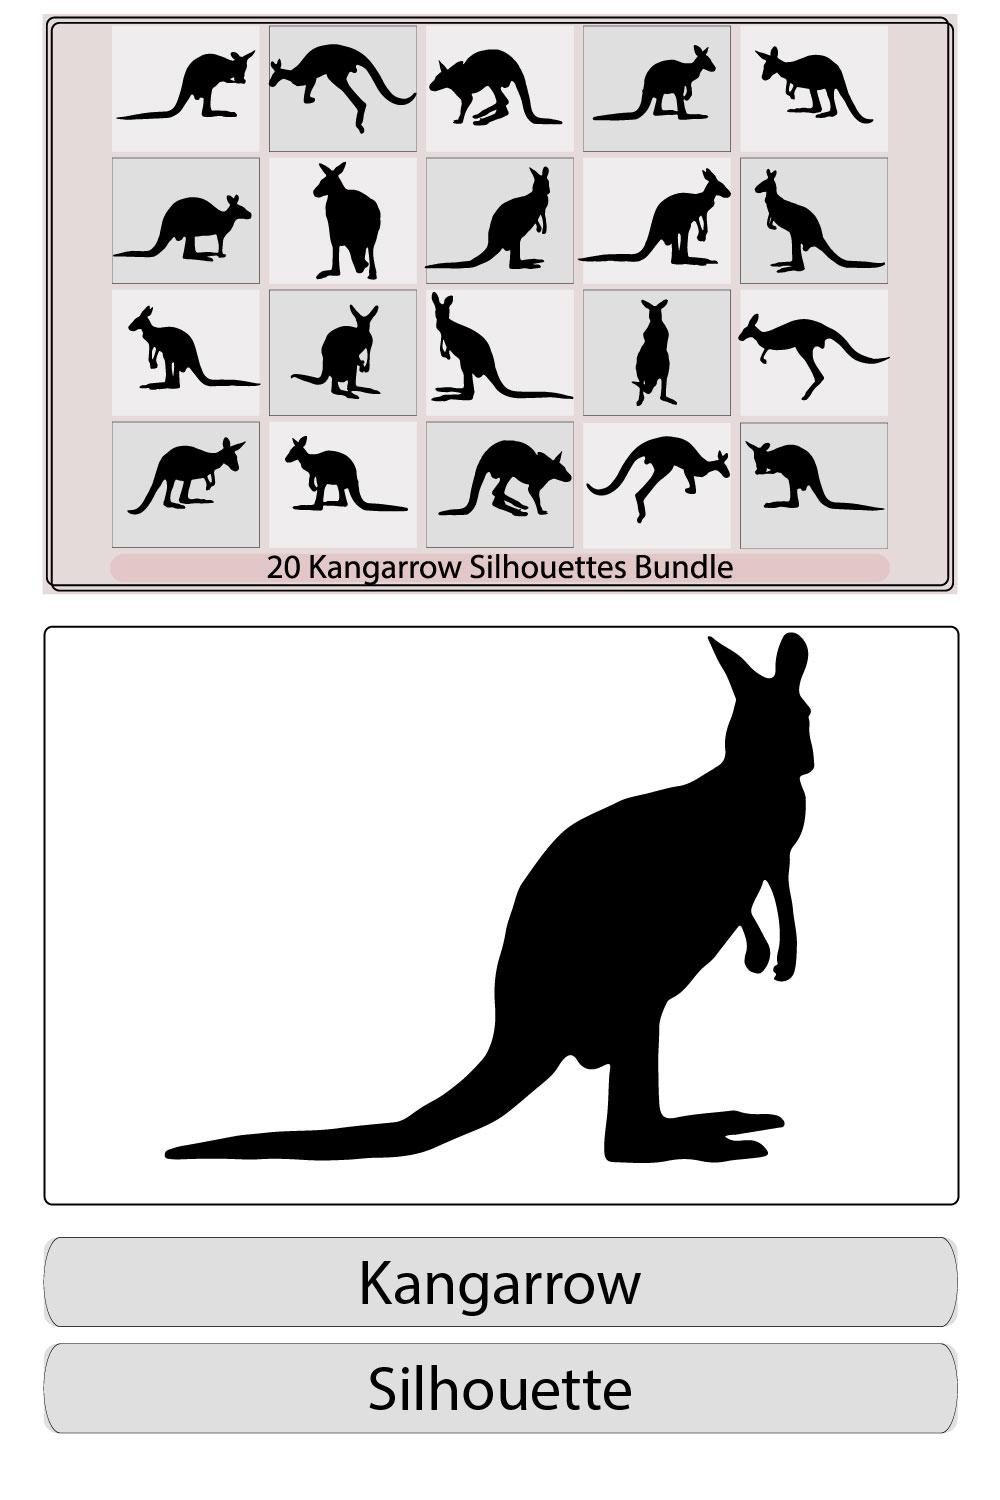 Kangaroo vector silhouette,collection of kangaroo silhouette kangaroo silhouette,Set silhouettes of kangaroo,kangaroo logo icon designs vector pinterest preview image.